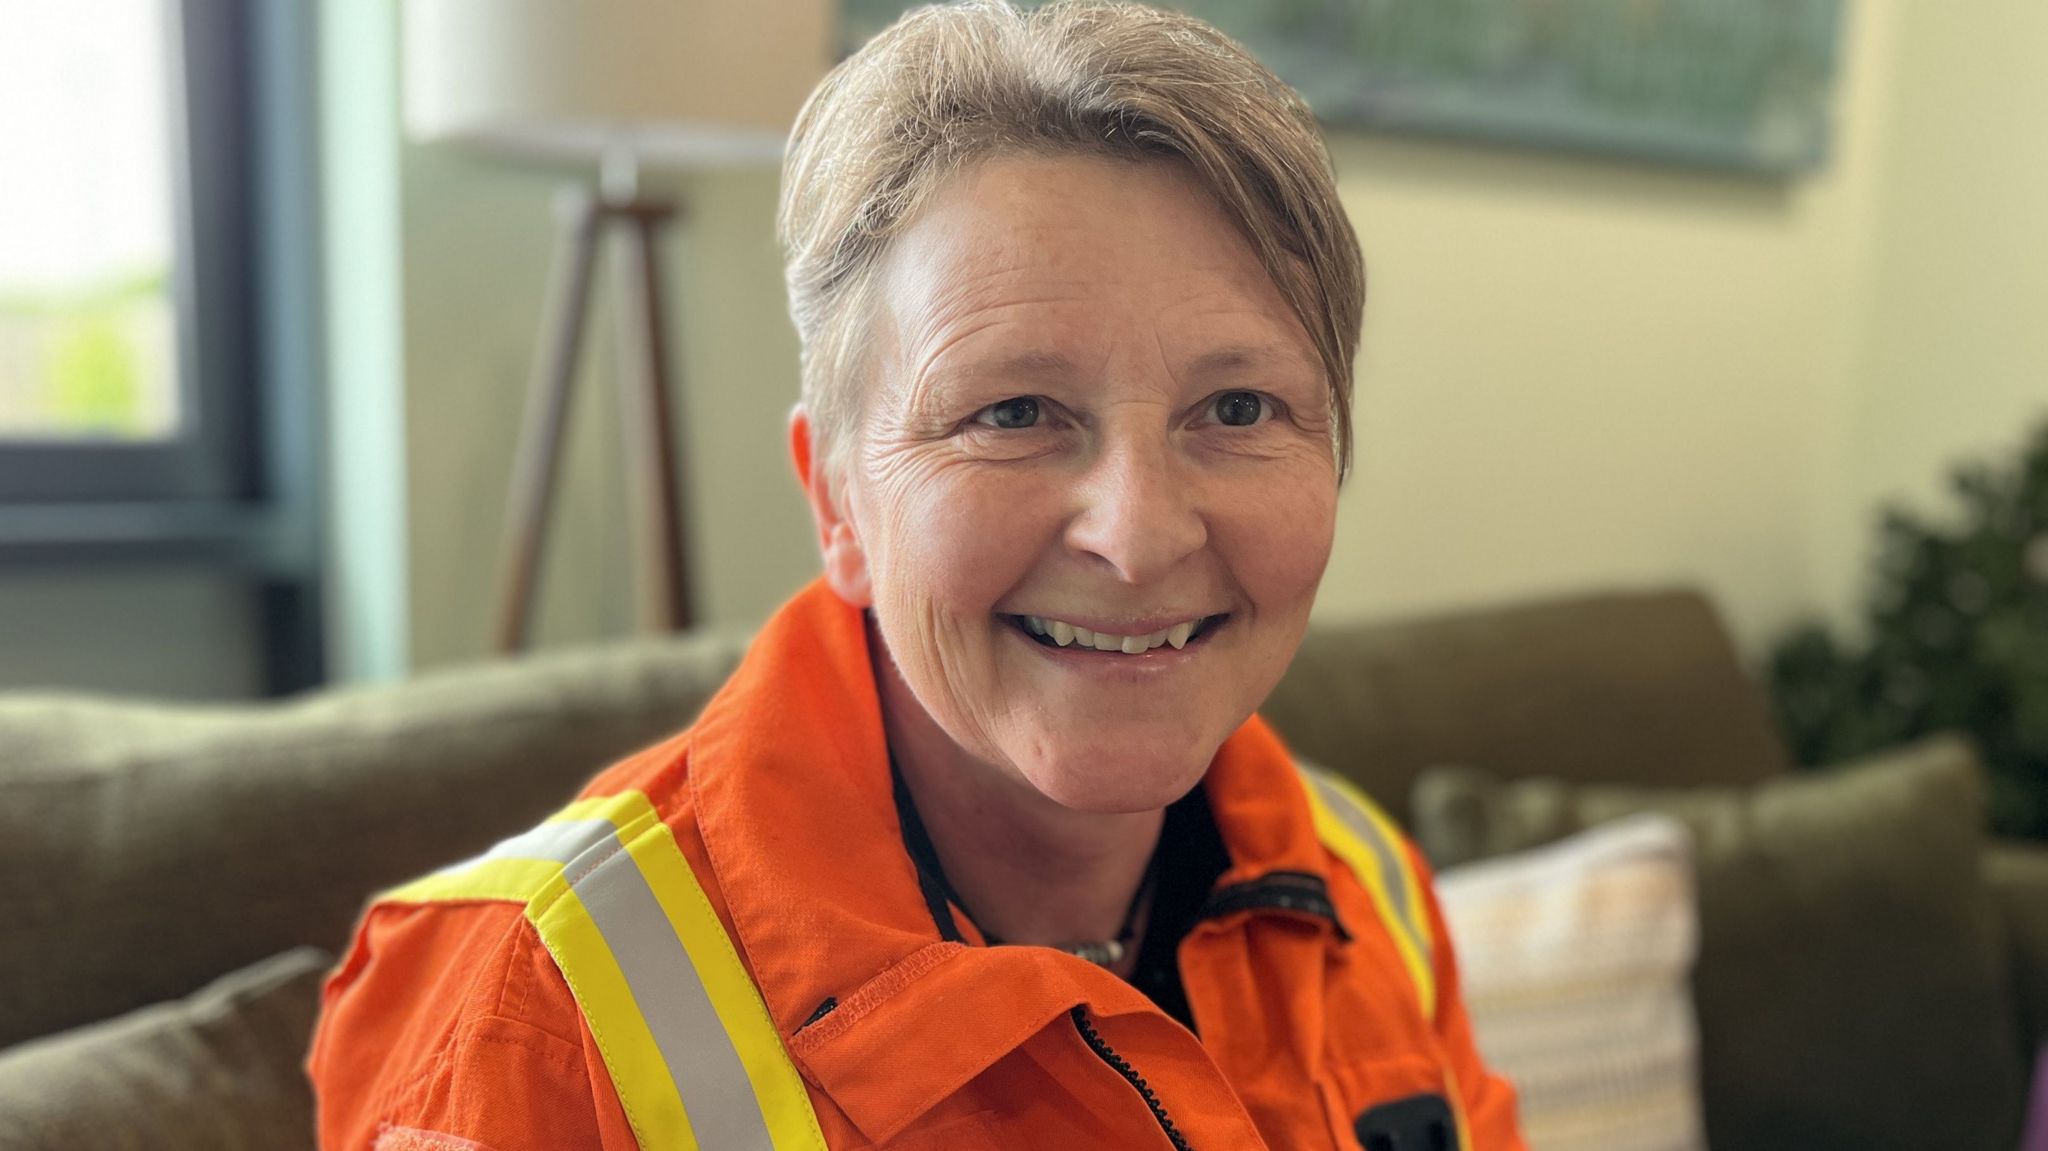 Louise Cox with short mousy brown hair smiling and wearing her orange high visibility uniform sat on the sofa in the charity's family room